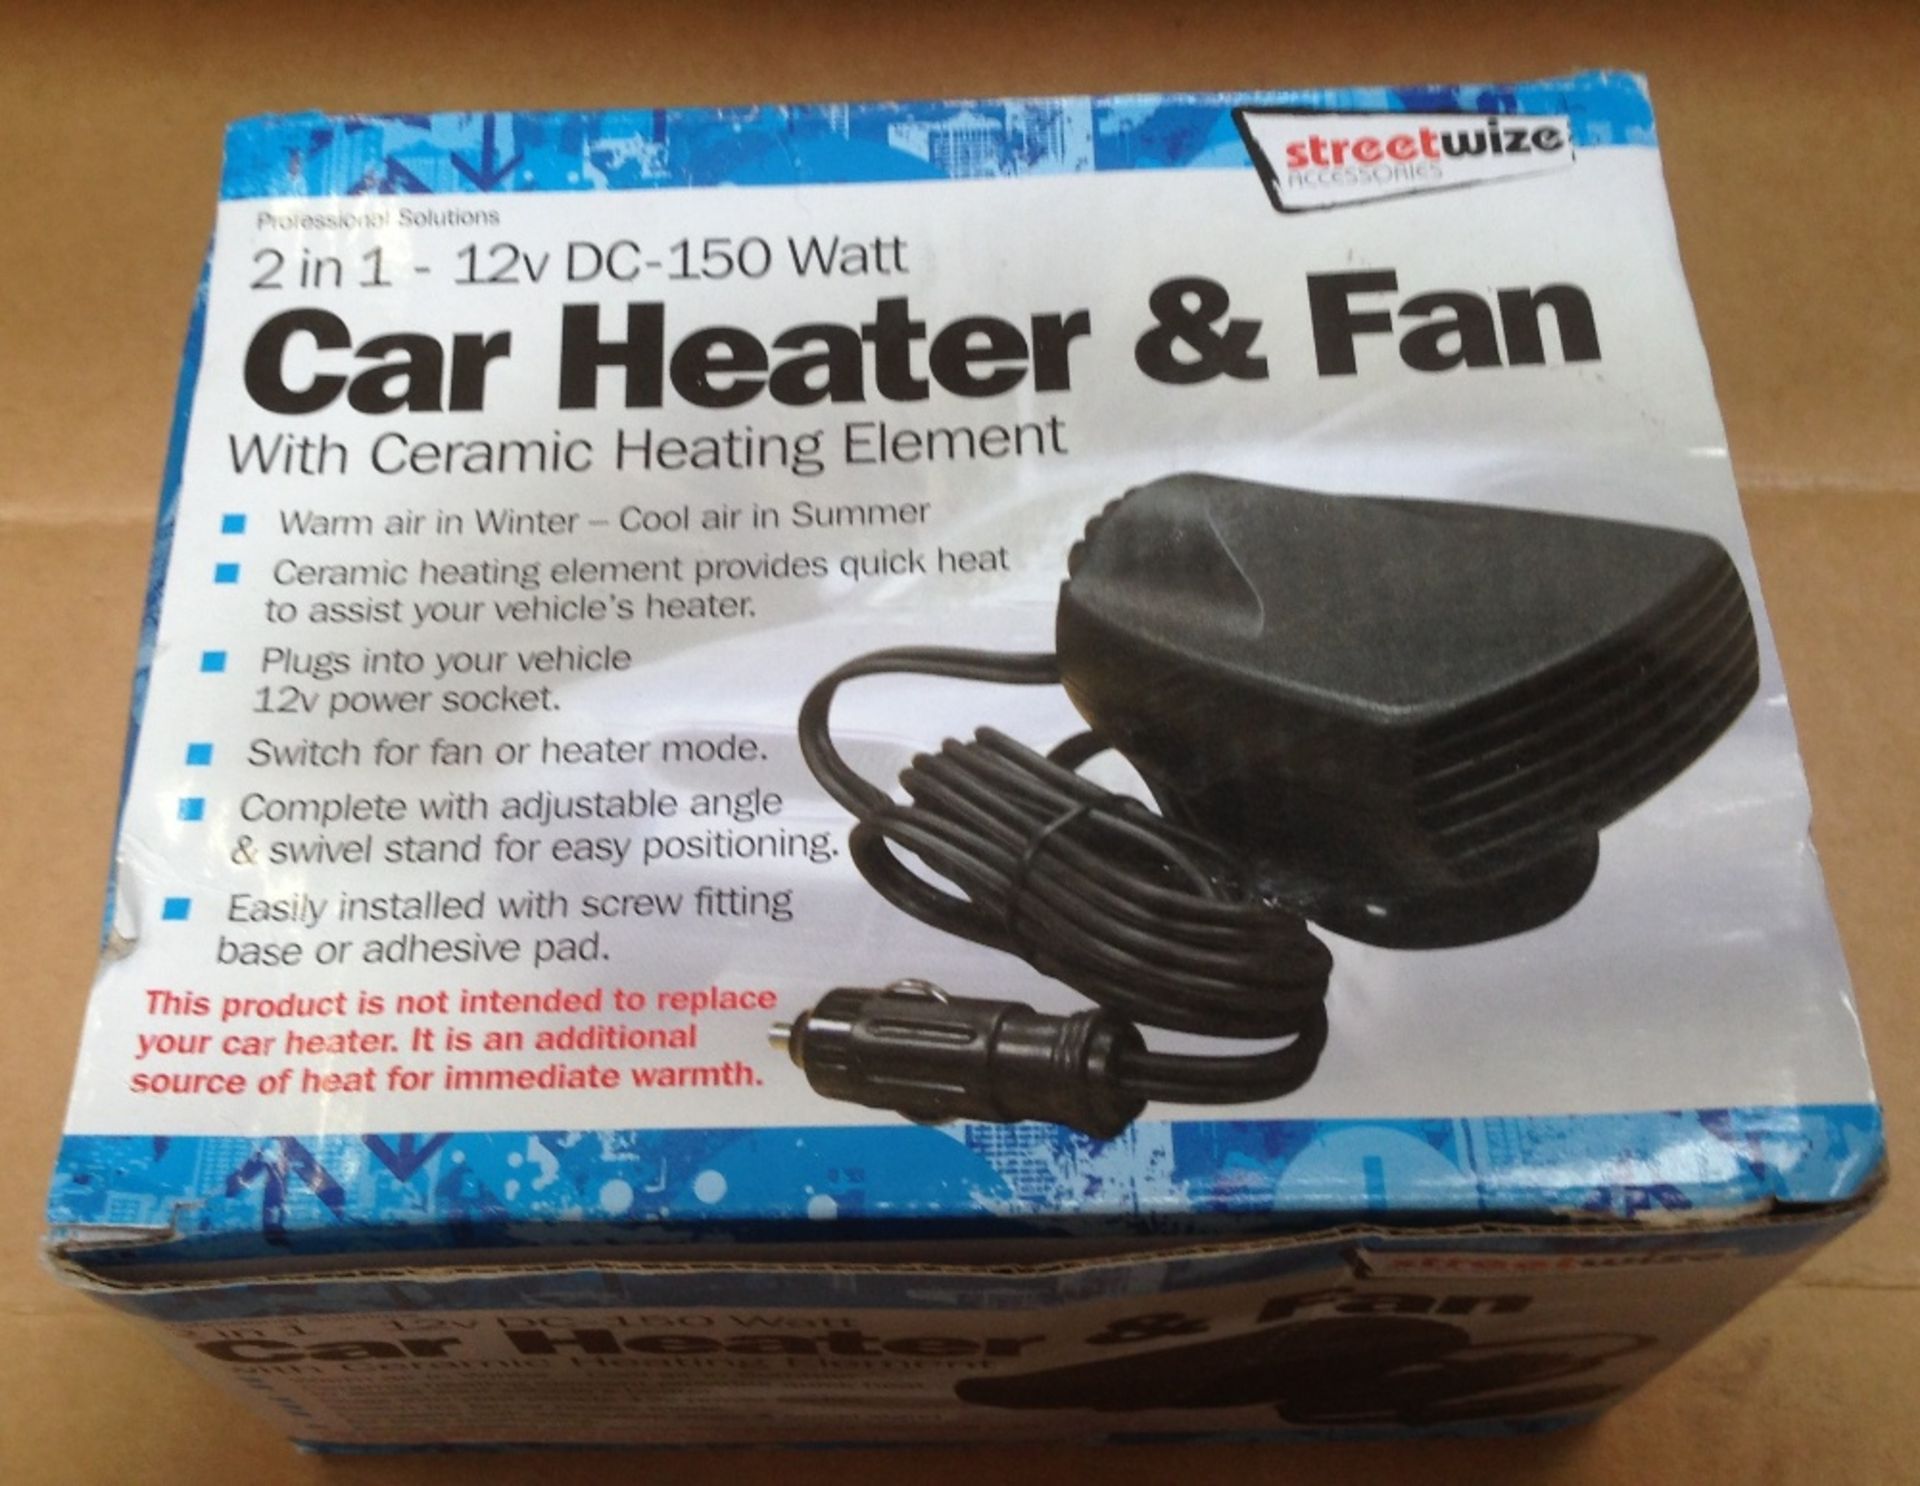 9pcs - Streetwise -  2 in 1 , 12V car heater / fan unit with ceramic heating element -  rrp £12.99 .